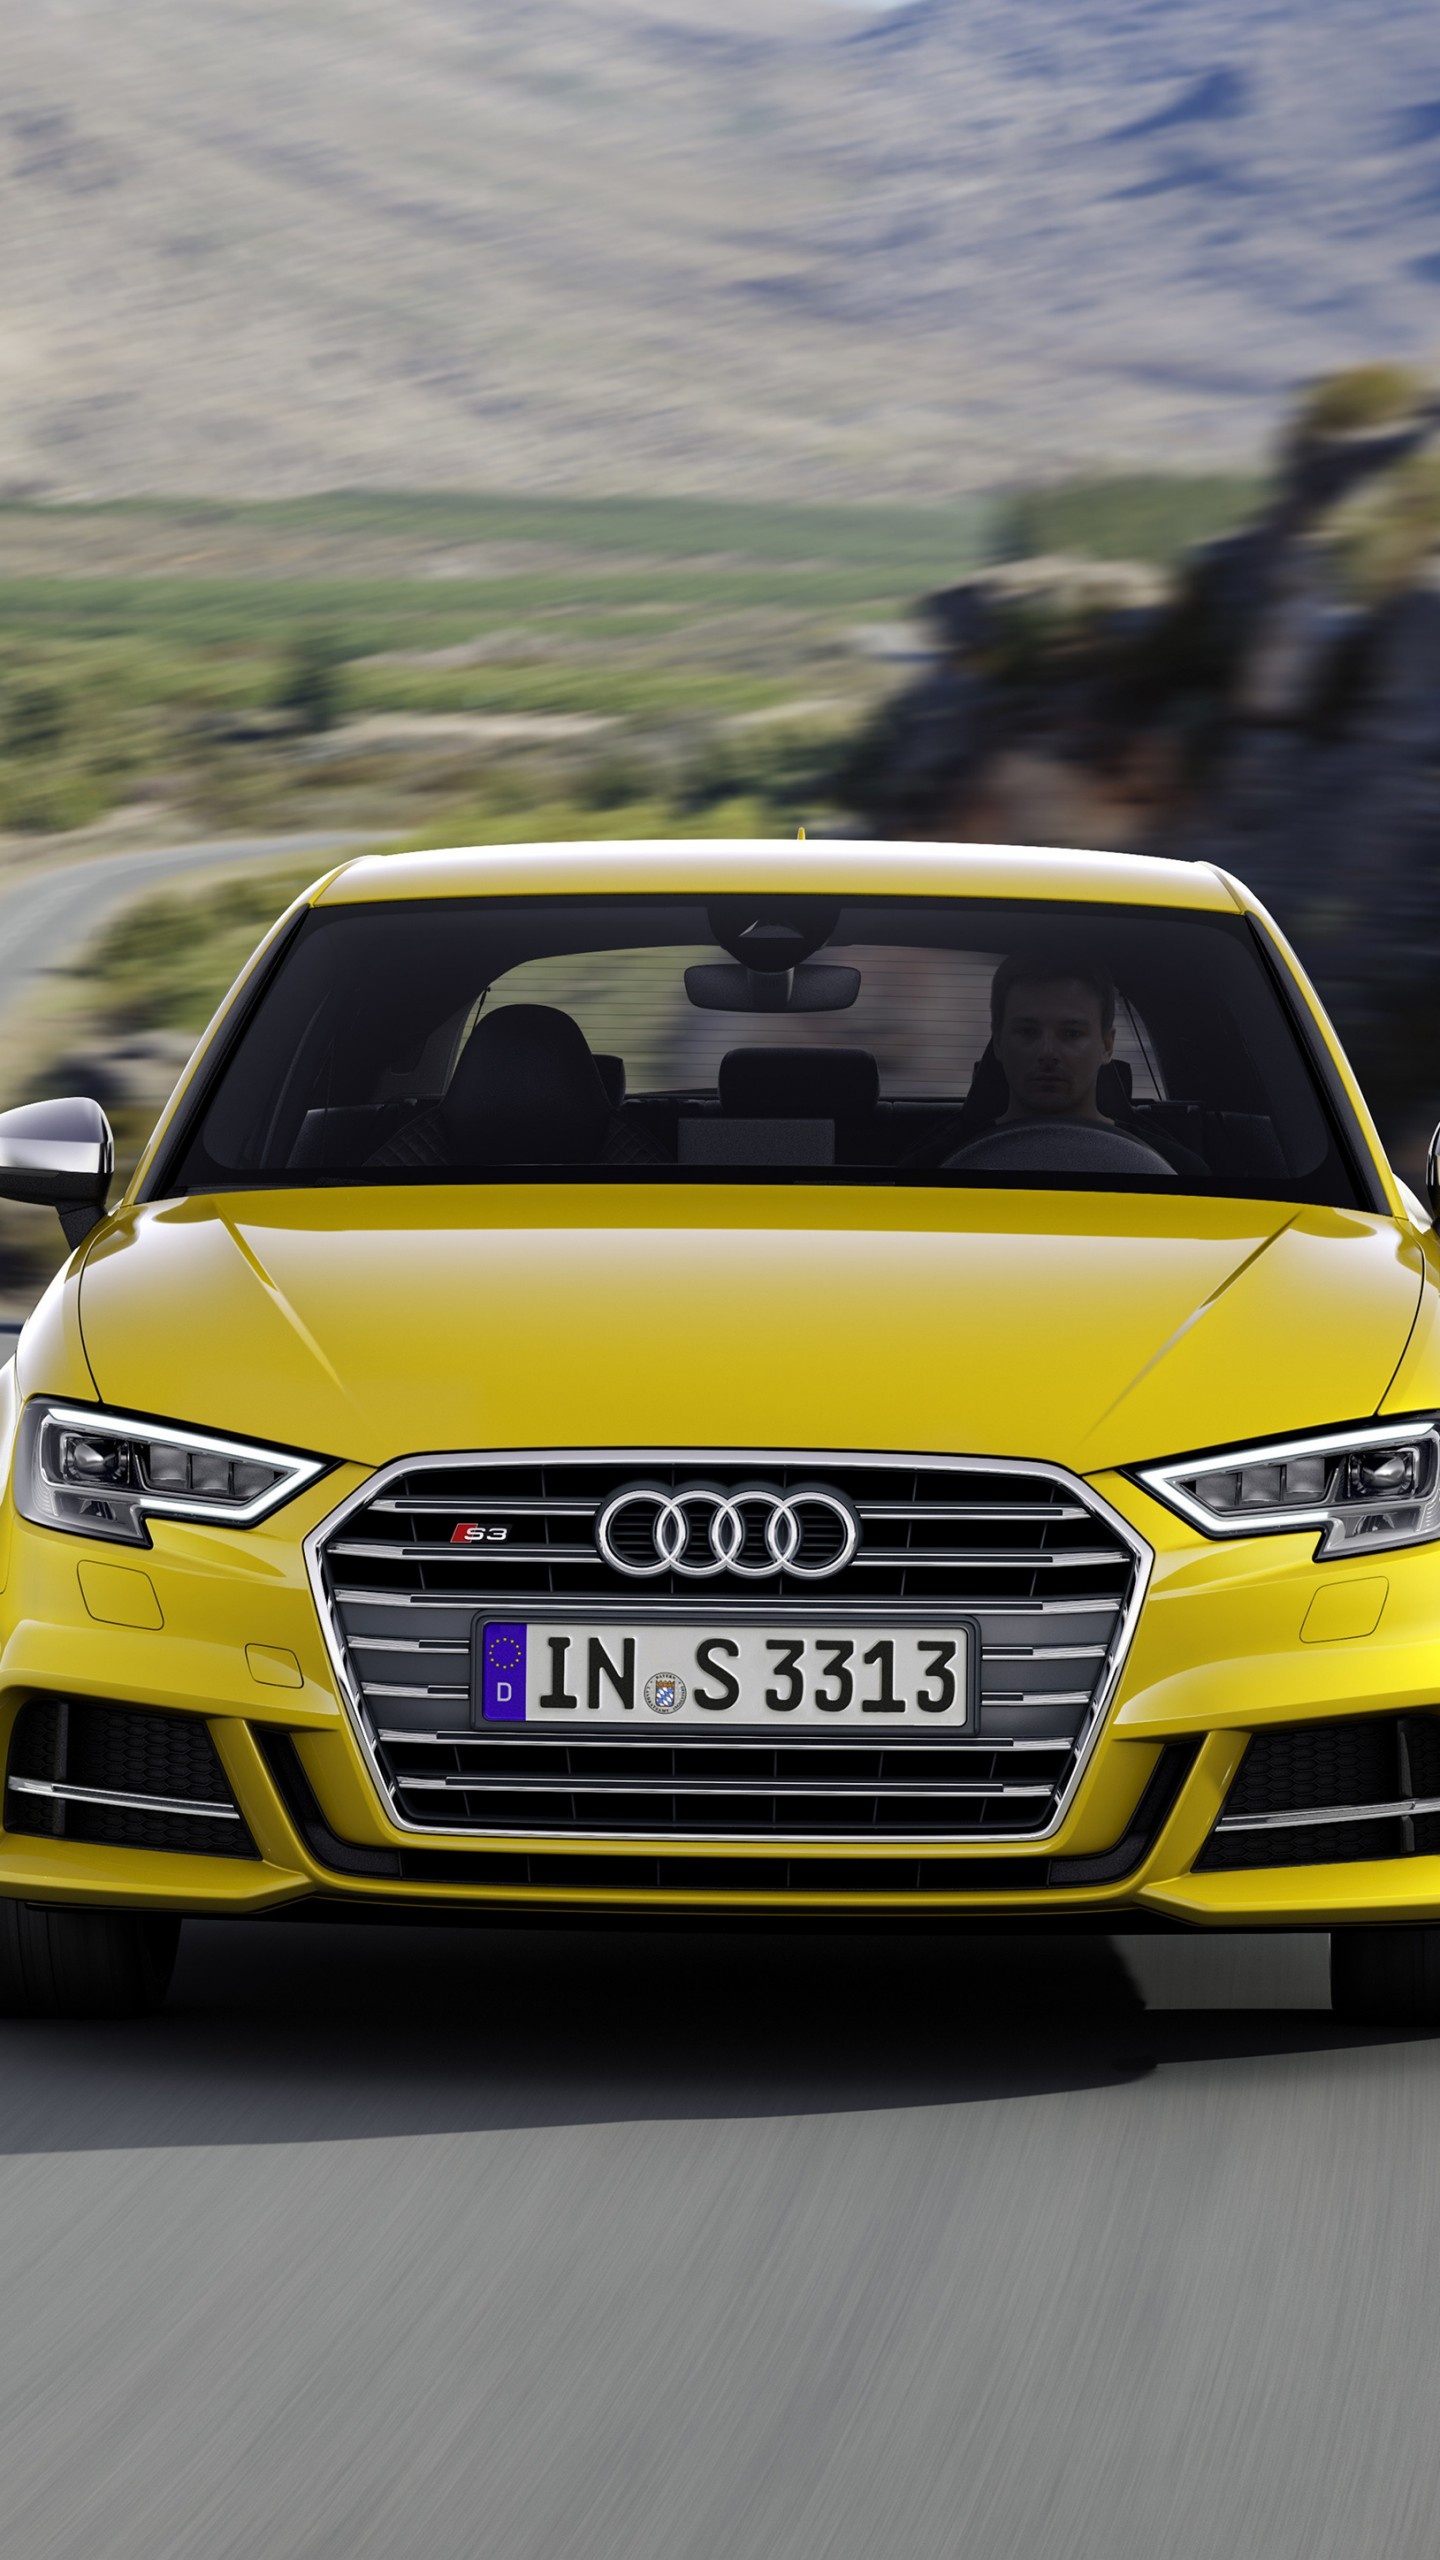 Audi S3, Cabriolet yellow, Cars and bikes, Wallpaper HD, 1440x2560 HD Handy